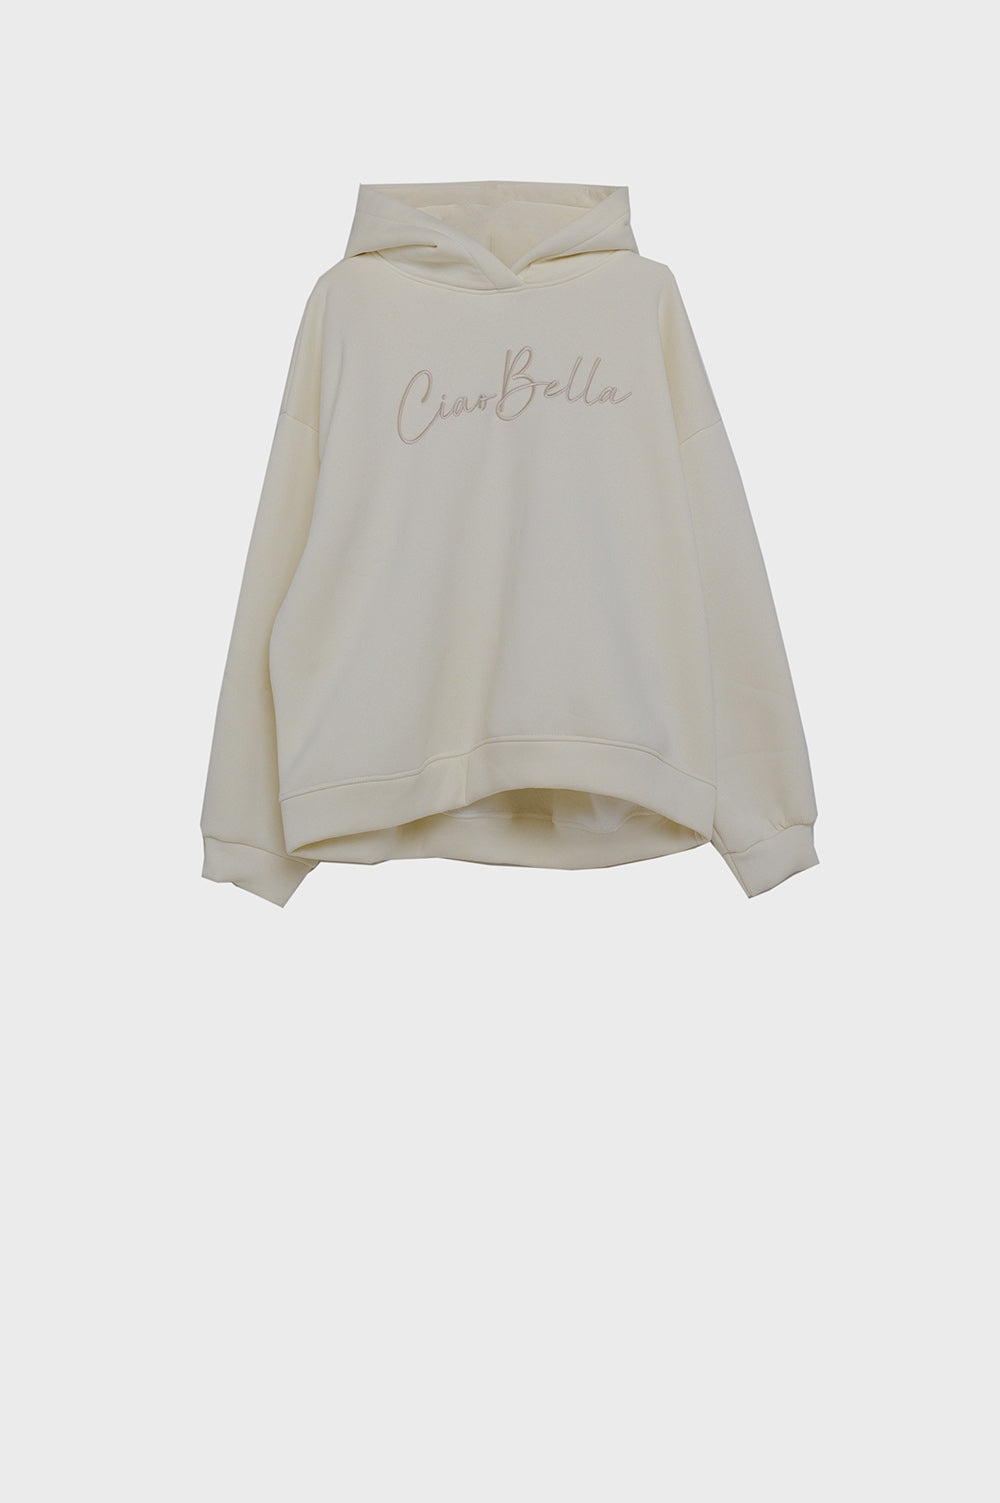 Q2 Hoodie With Ciao Bella In Cream